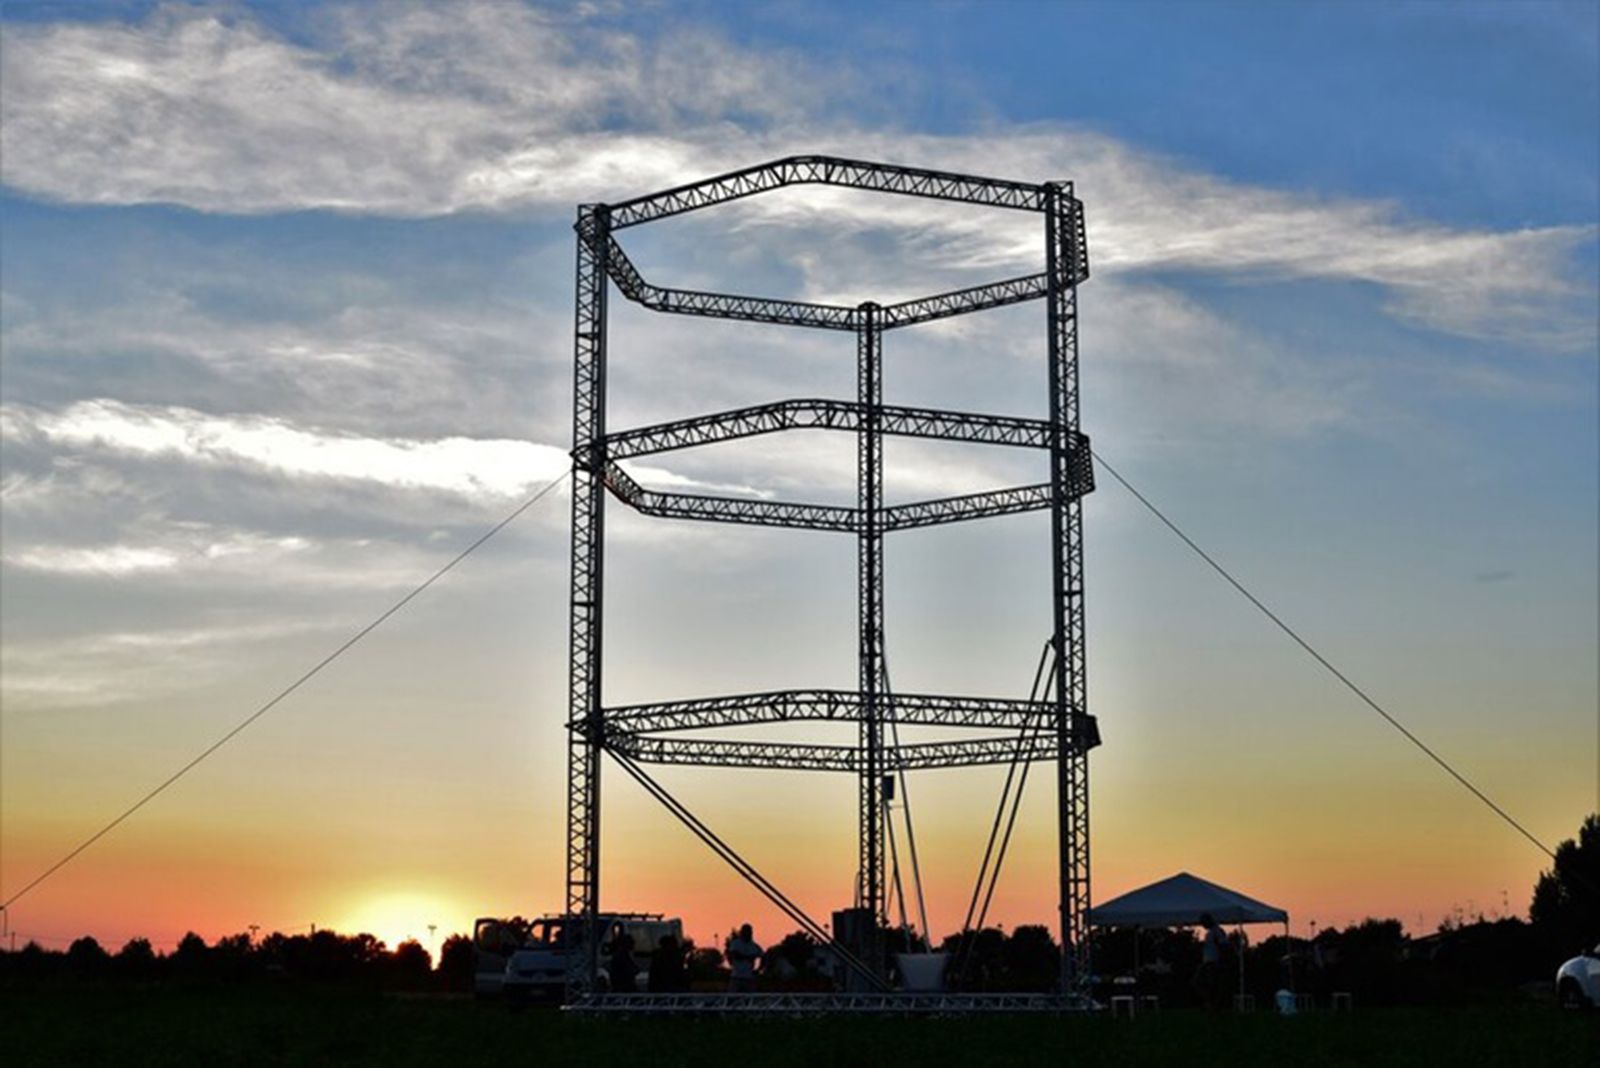 make an entire house from the giant wasp bigdelta 3d printer nearly for free image 1